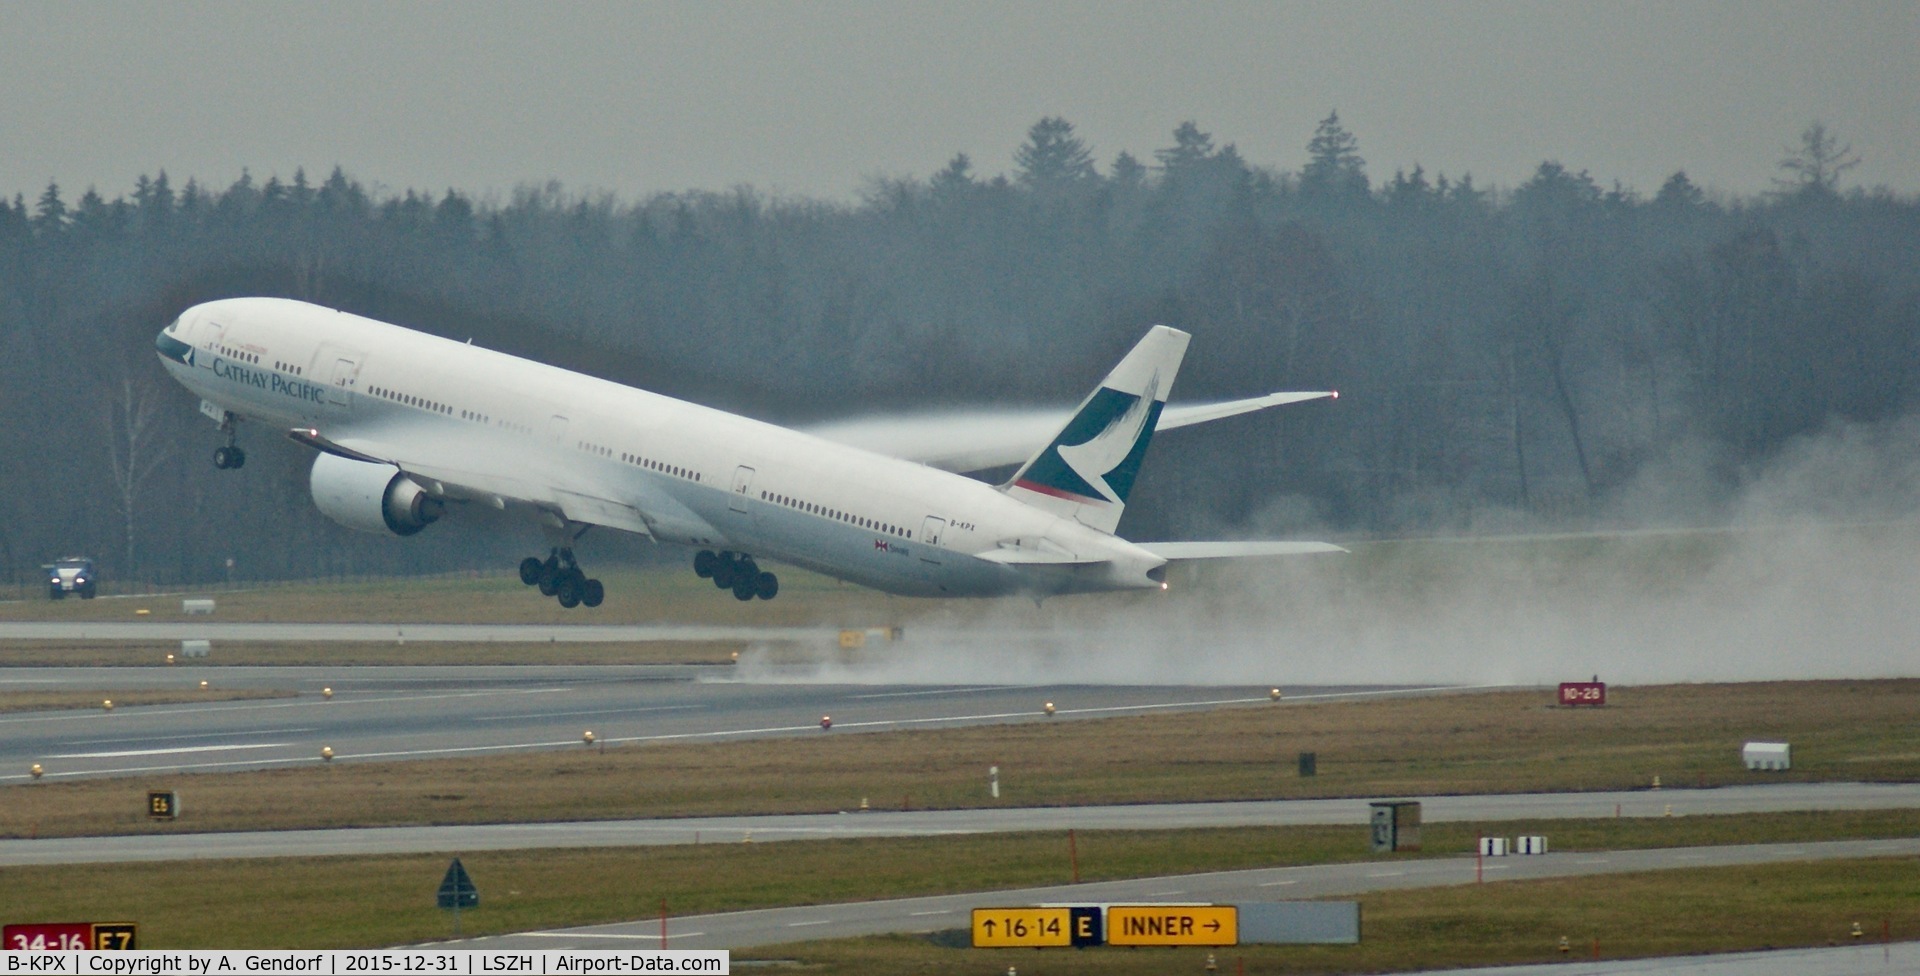 B-KPX, 2011 Boeing 777-367/ER C/N 37897, Cathay Pacific, makes here a very wet departure on RWY28 at Zürich-Kloten(LSZH), bound for Hong Kong(VHHH)